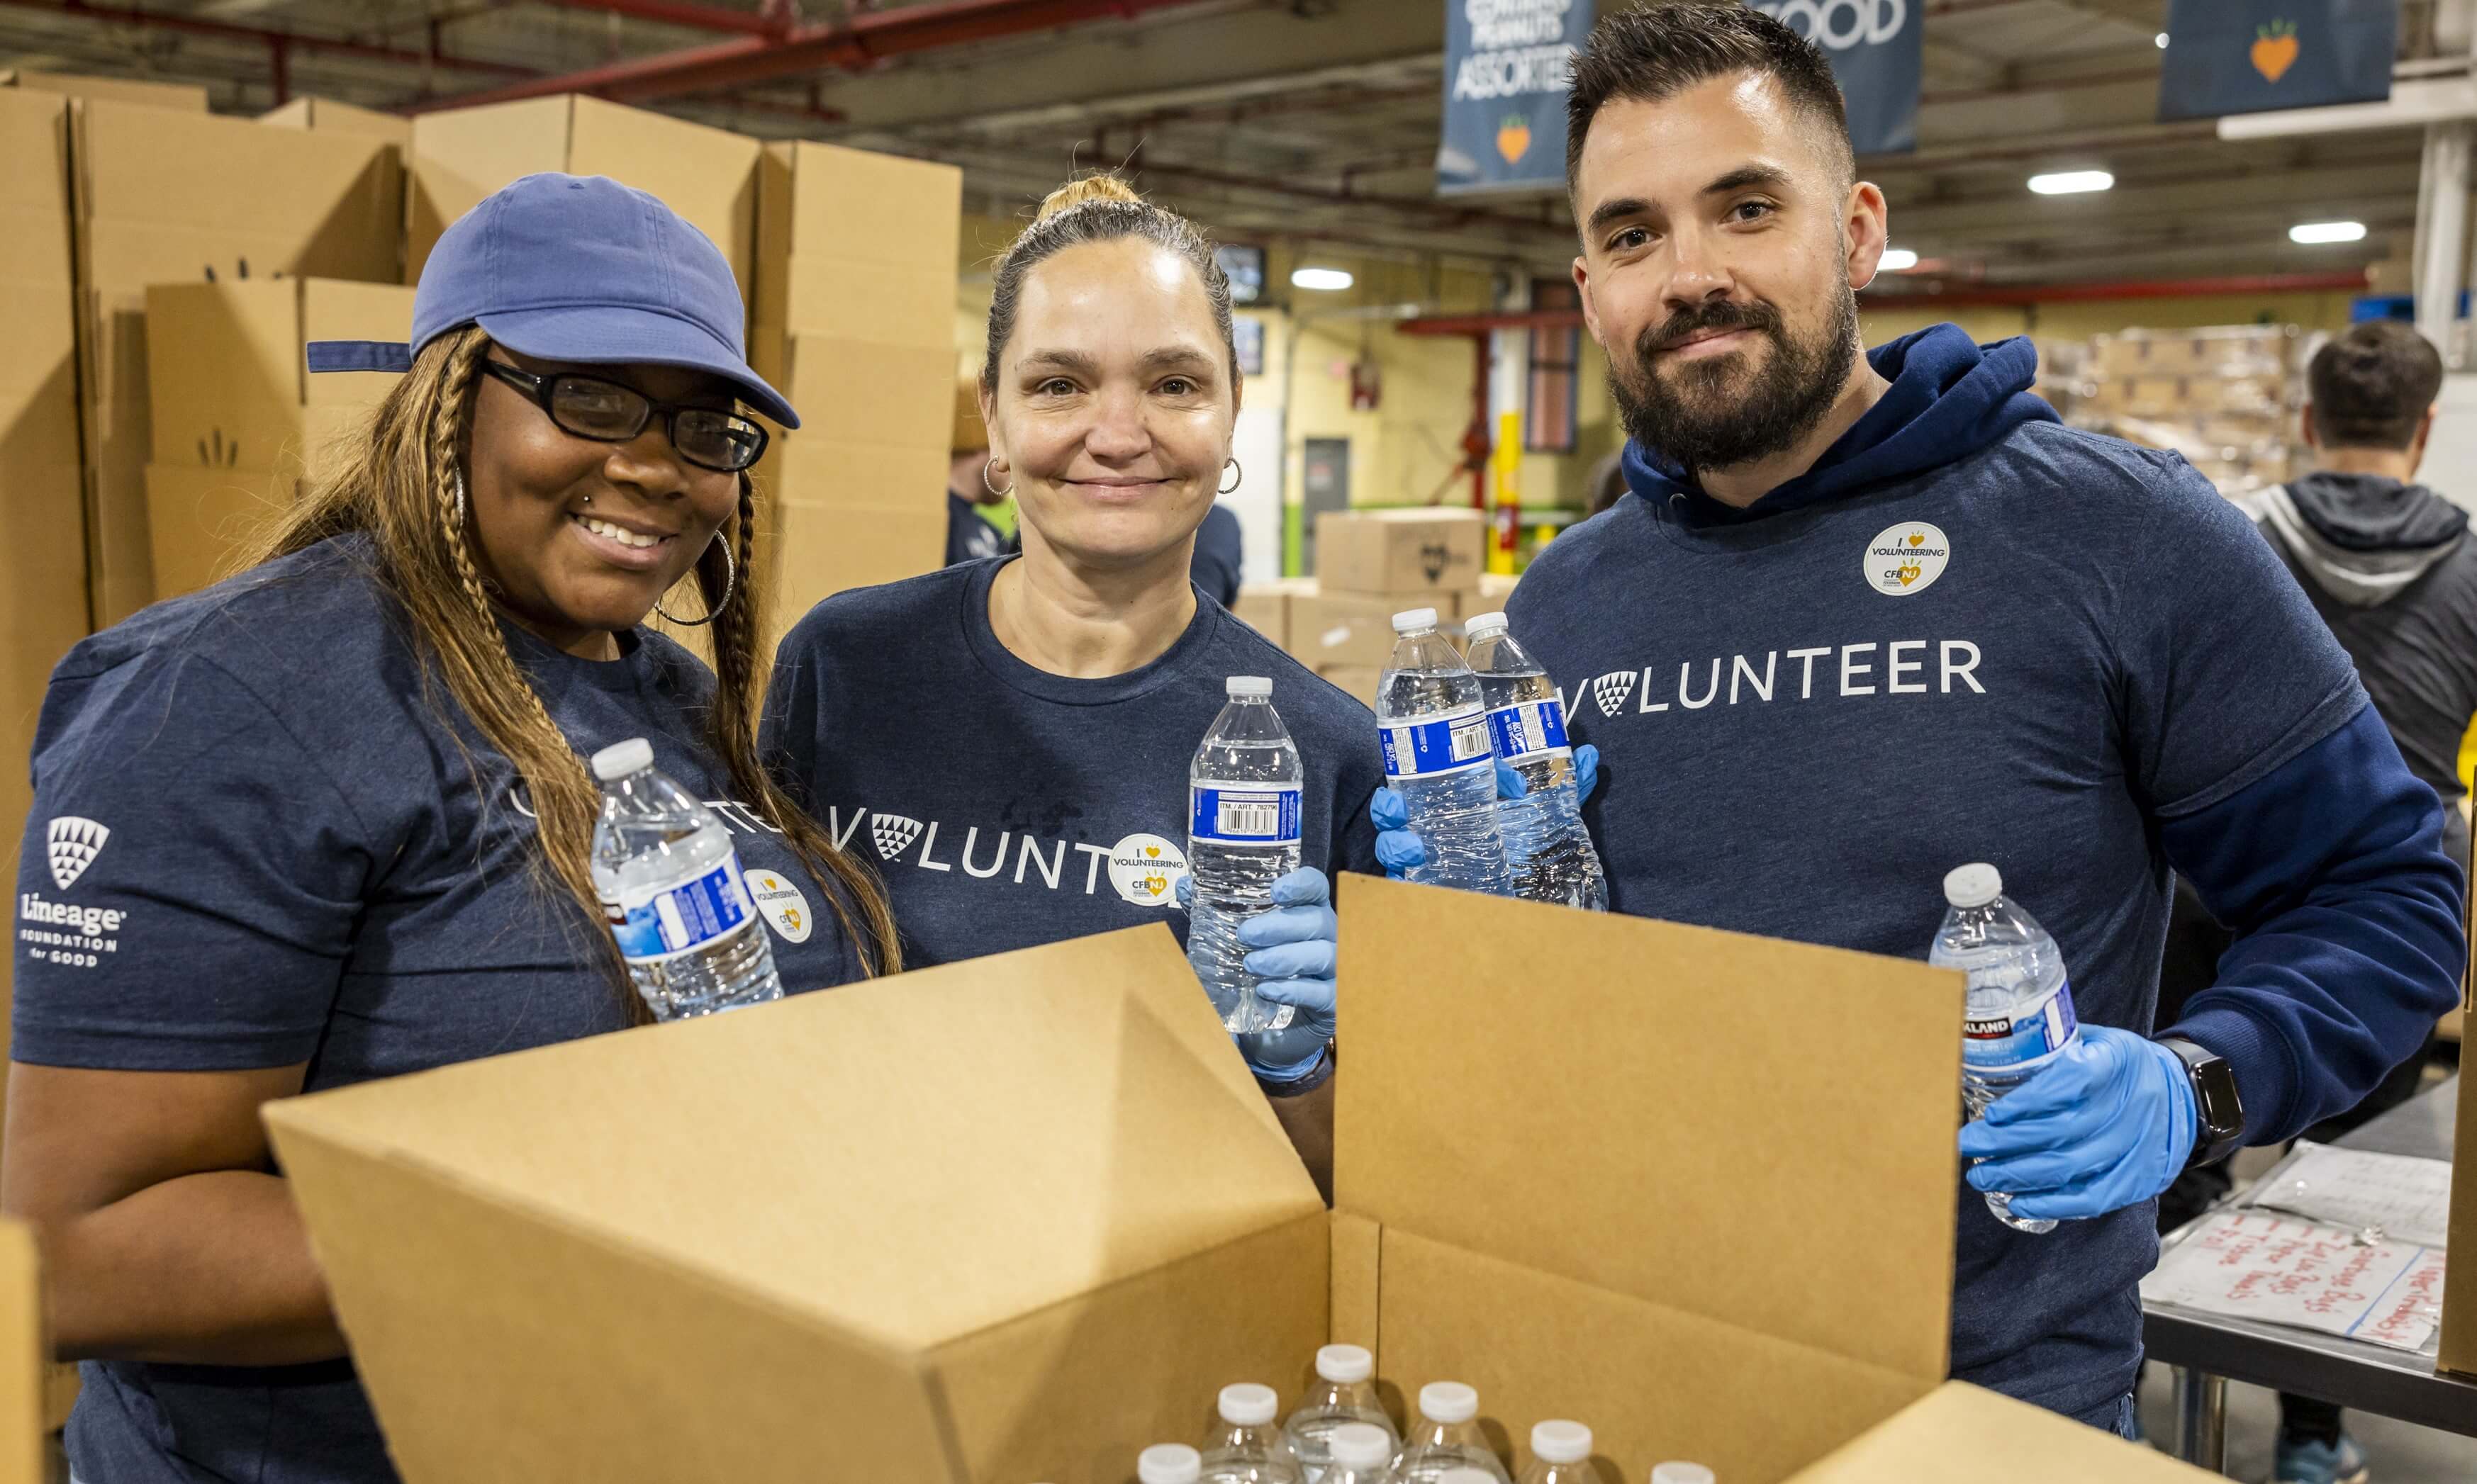 Three volunteers packing water bottles for distribution, wearing blue 'VOLUNTEER' t-shirts and smiling.